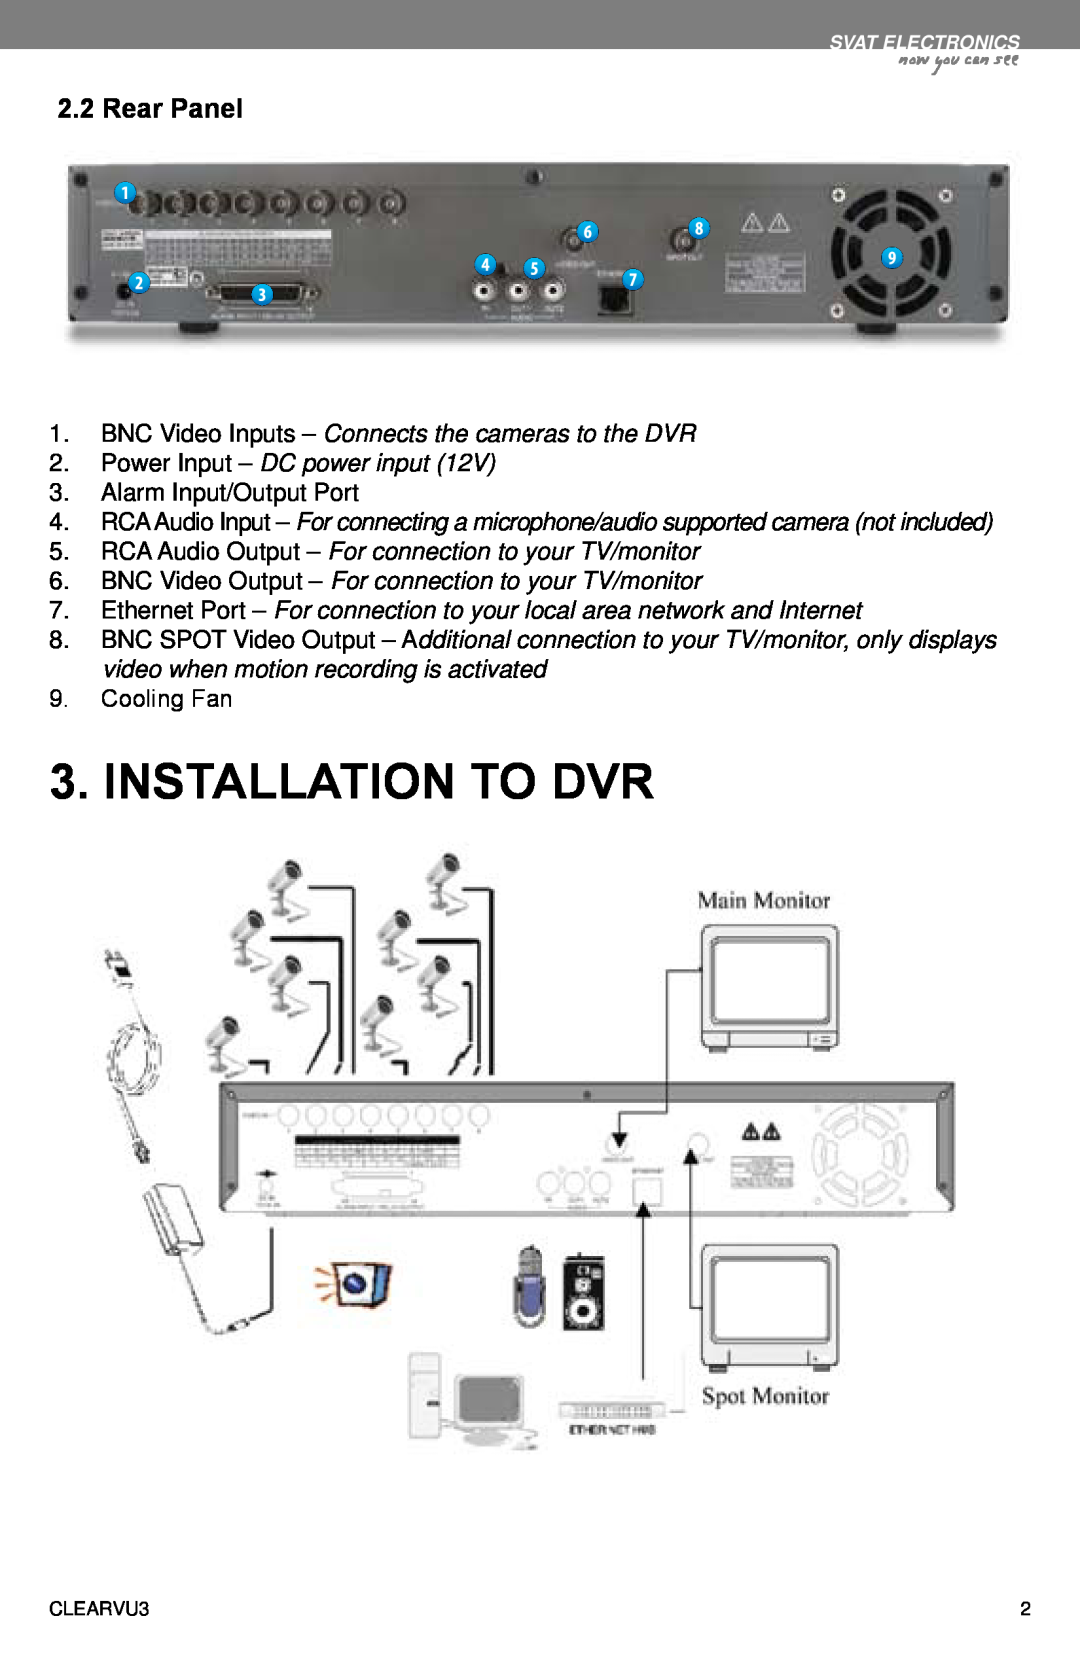 SVAT Electronics CLEARVU3 instruction manual Installation To Dvr, Rear Panel, now you can see 